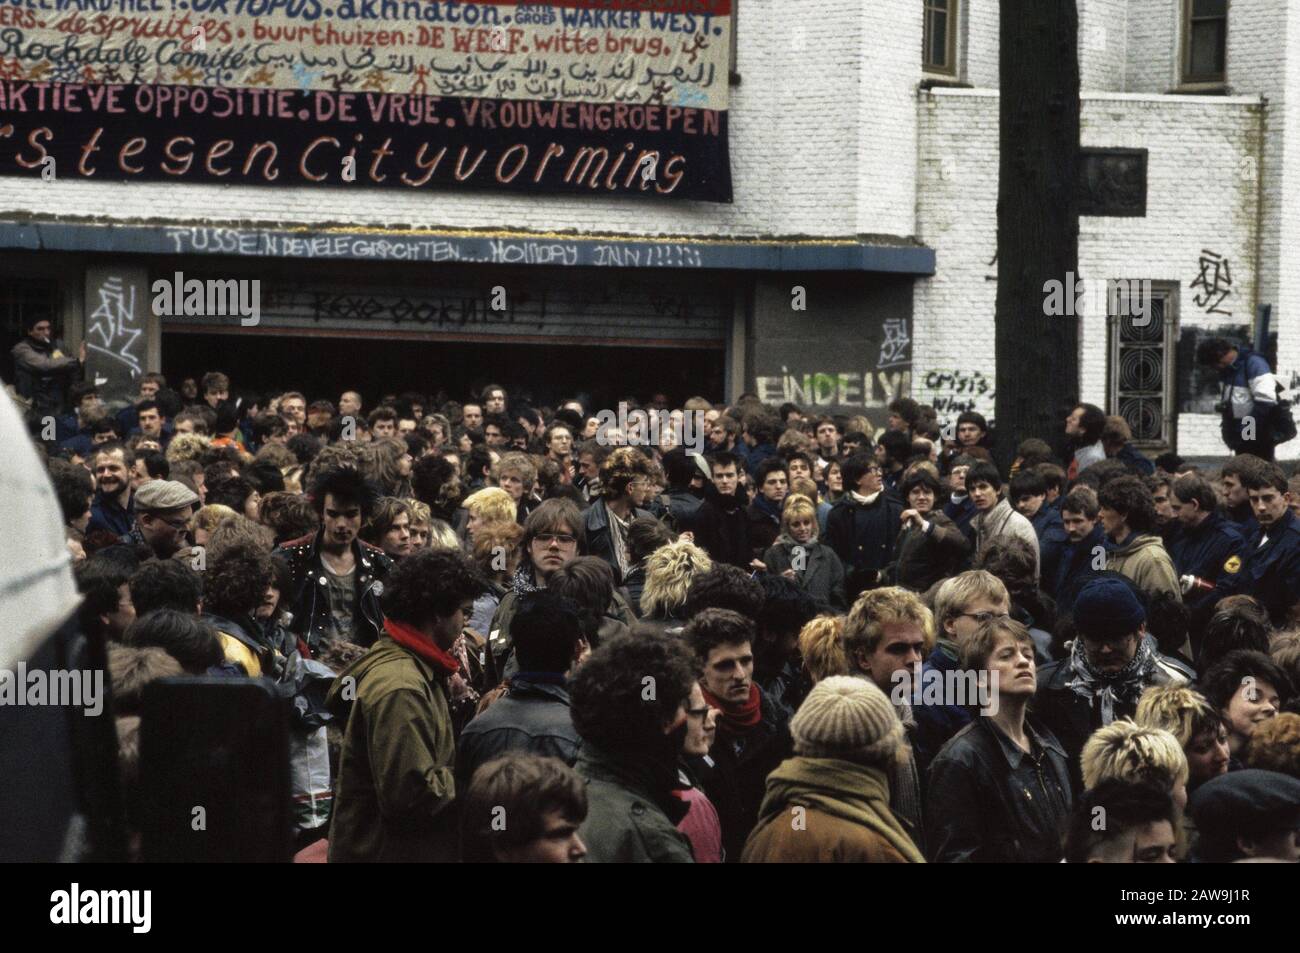 Clearance cracking complex Wyers in Amsterdam; activists and residents leave en masse the premises Date: February 14, 1983 Location: Amsterdam, Noord-Holland Keywords: squats, evictions Institution Name: Wyers Stock Photo